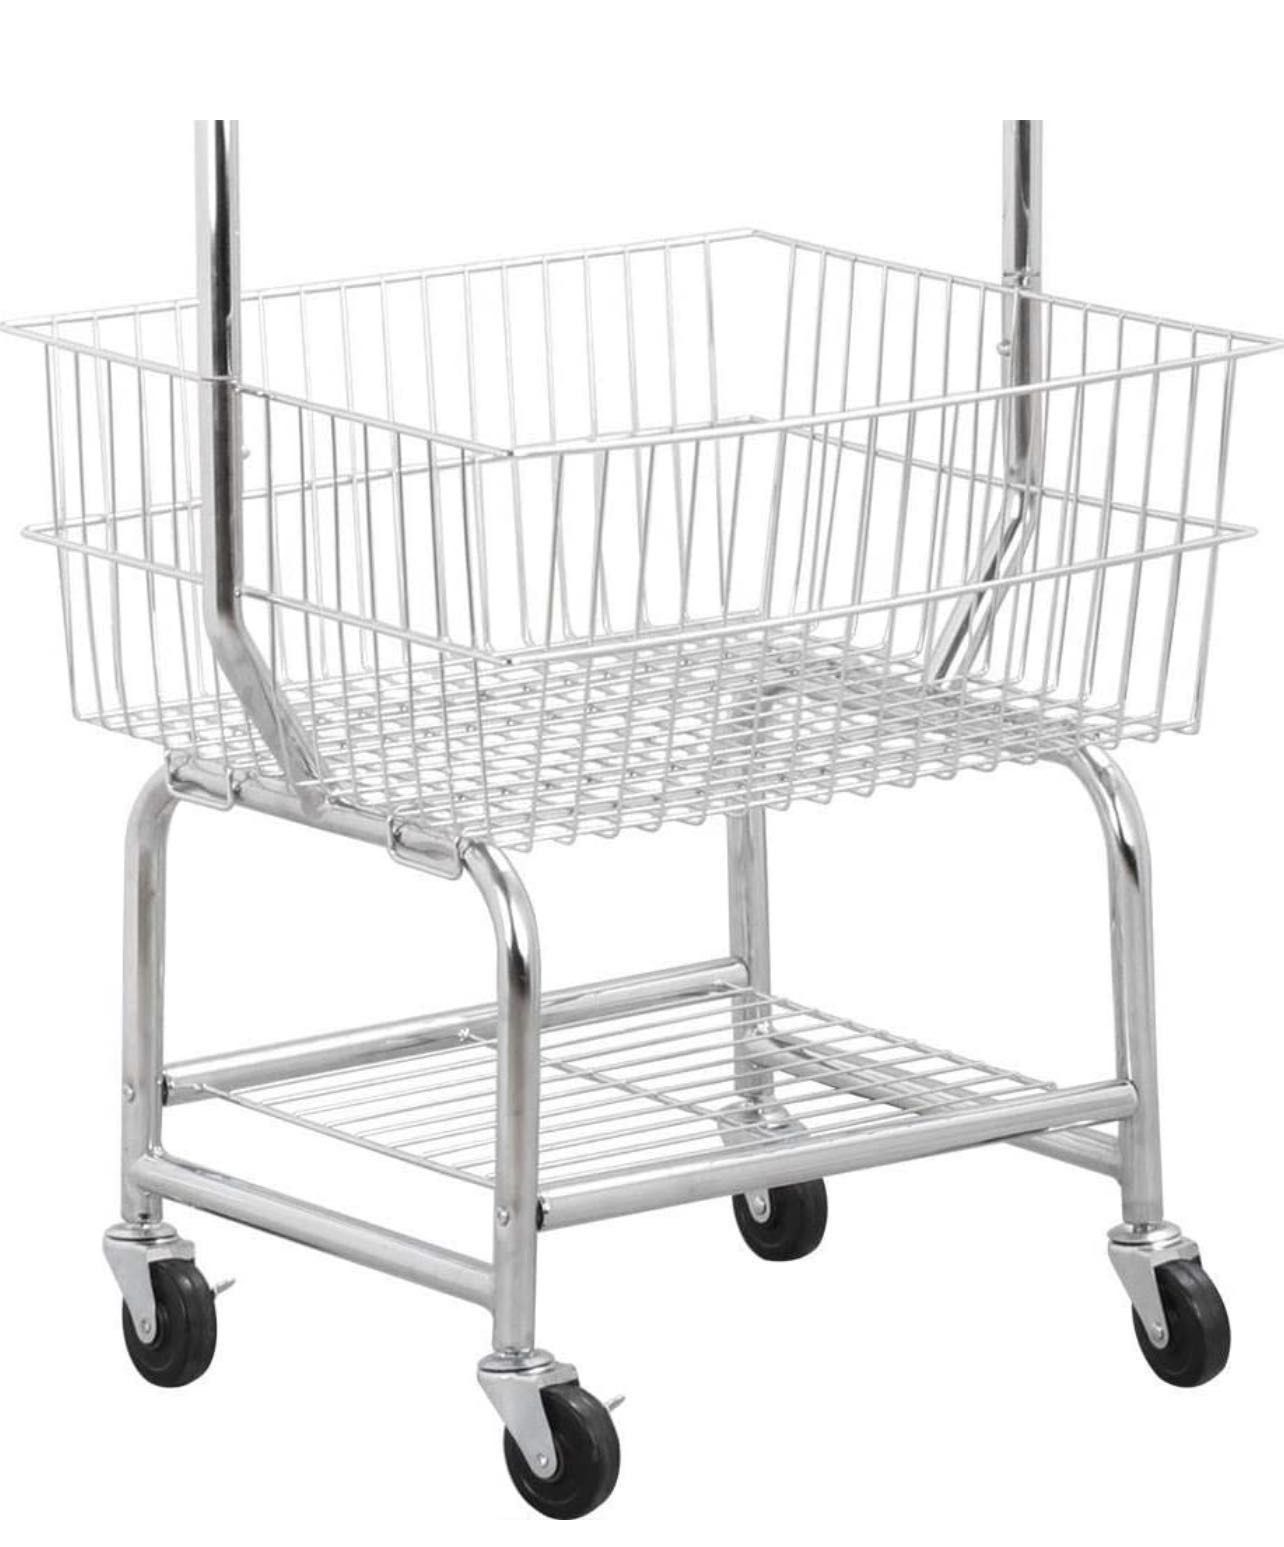 Rolling Laundry Bakset with Wheels, Laundry Cart with Hanging Rack, Metal Laundry Hamper Basket Butler Cart with Wheels and Wire Storage Rack, Silver 